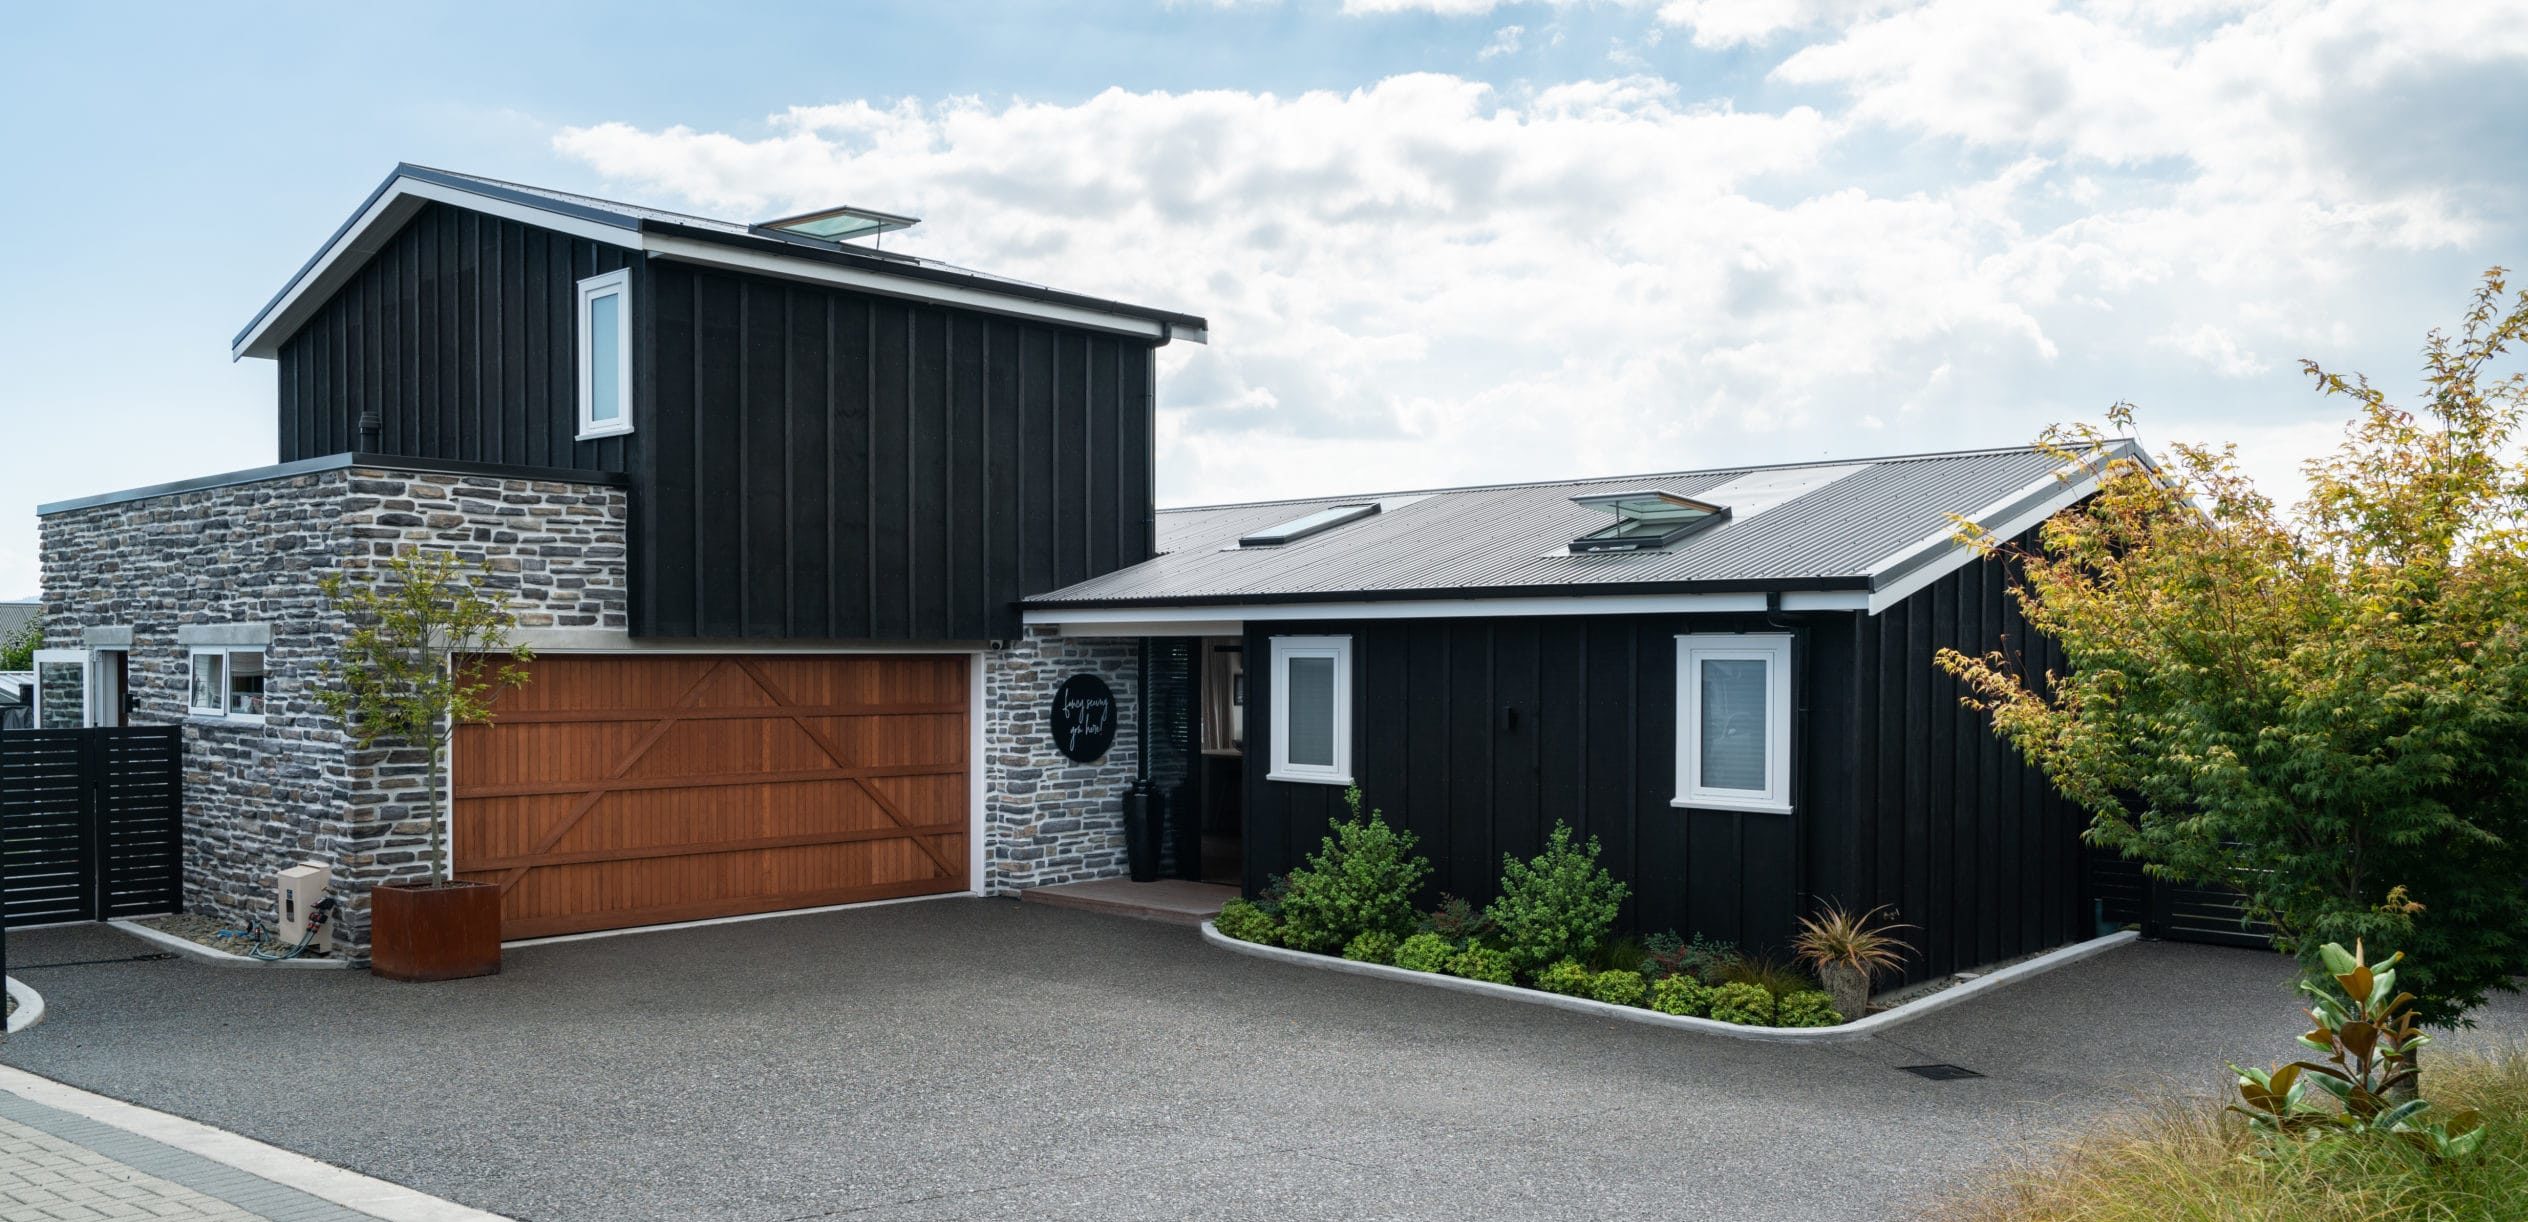 Exterior of a house with a large wooden garage door